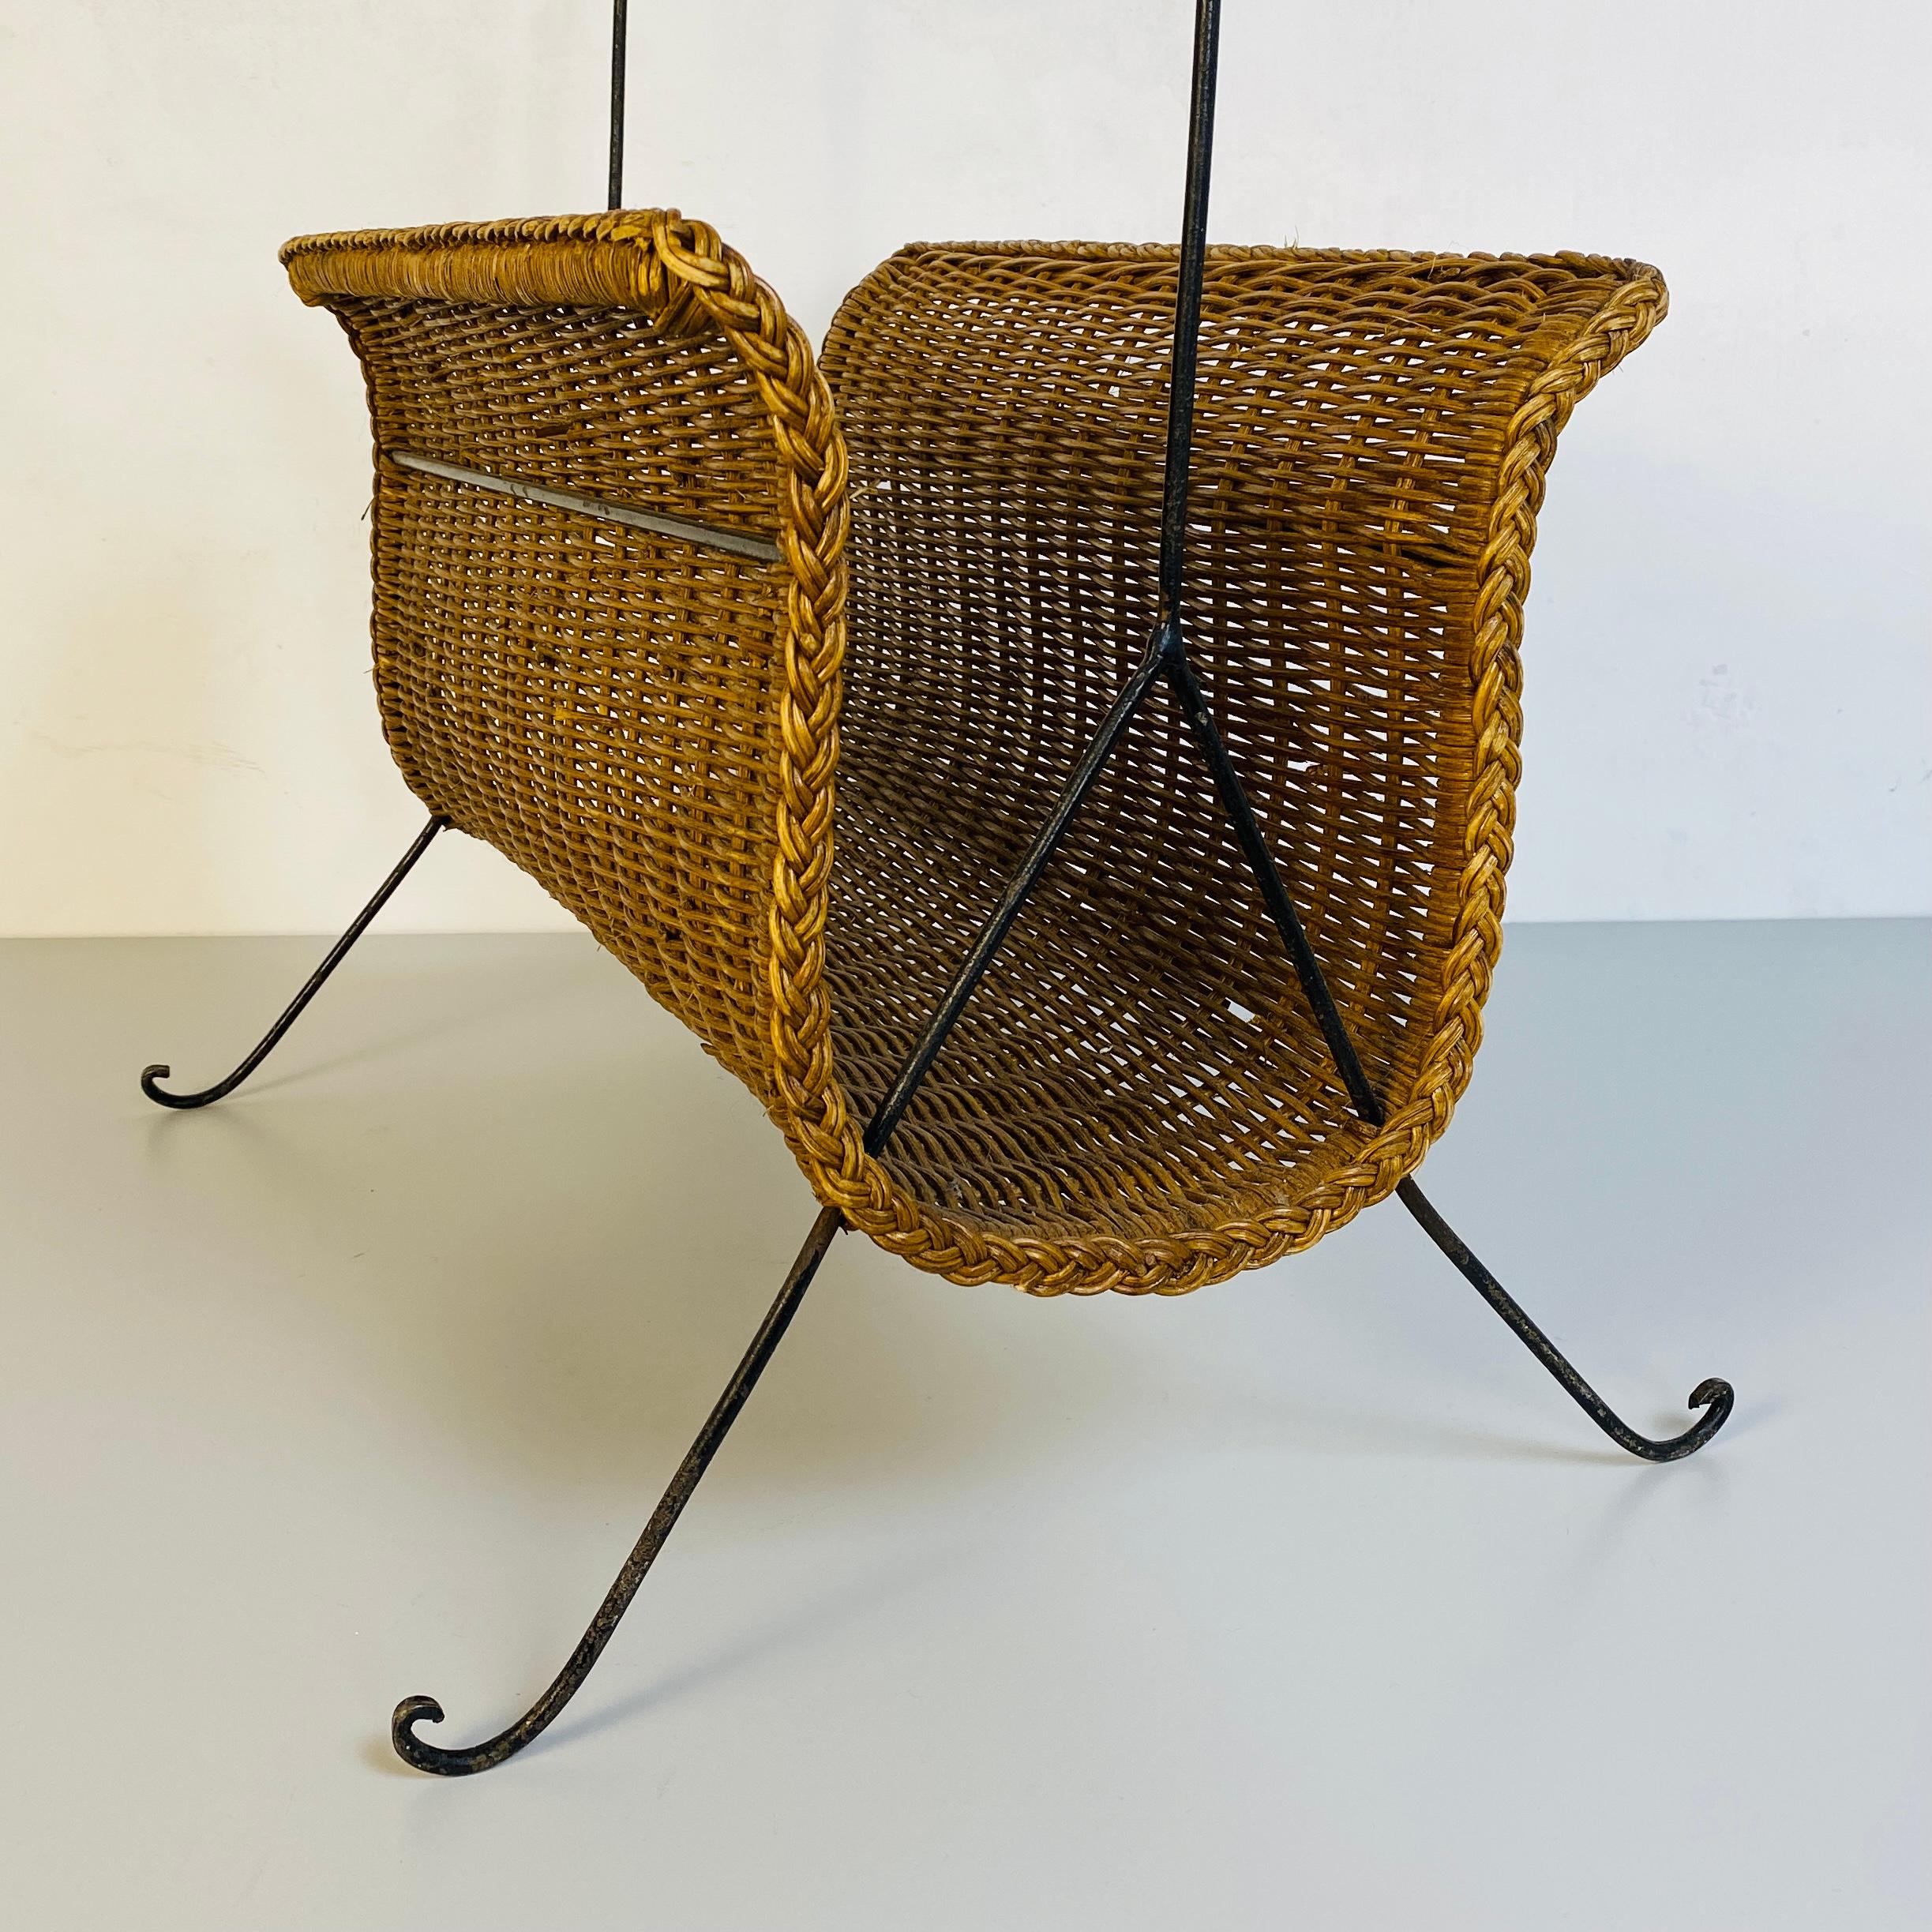 Italian Mid-Century Modern Straw Magazine Rack with Metal Structure, 1970s For Sale 5